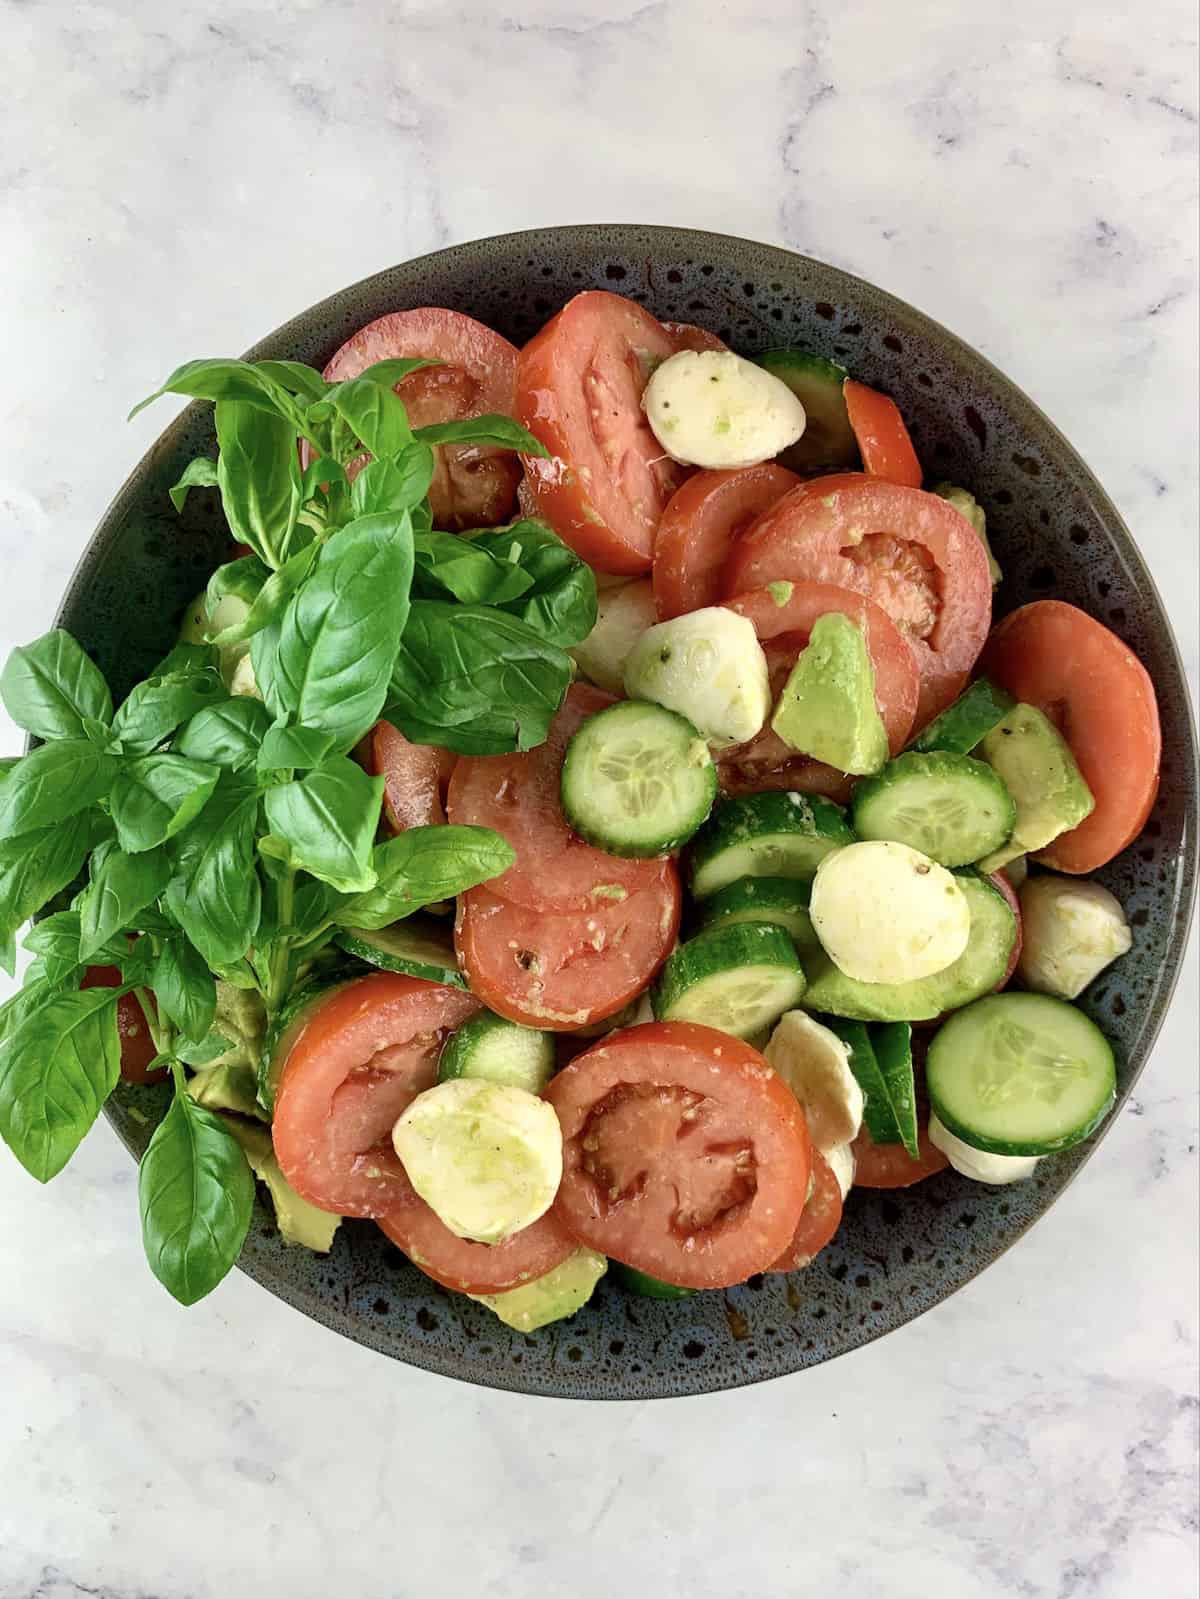 TRICOLORE SALAD IN A DARK GREY BOWL WITH BASIL SPRIGS ON THE SIDE